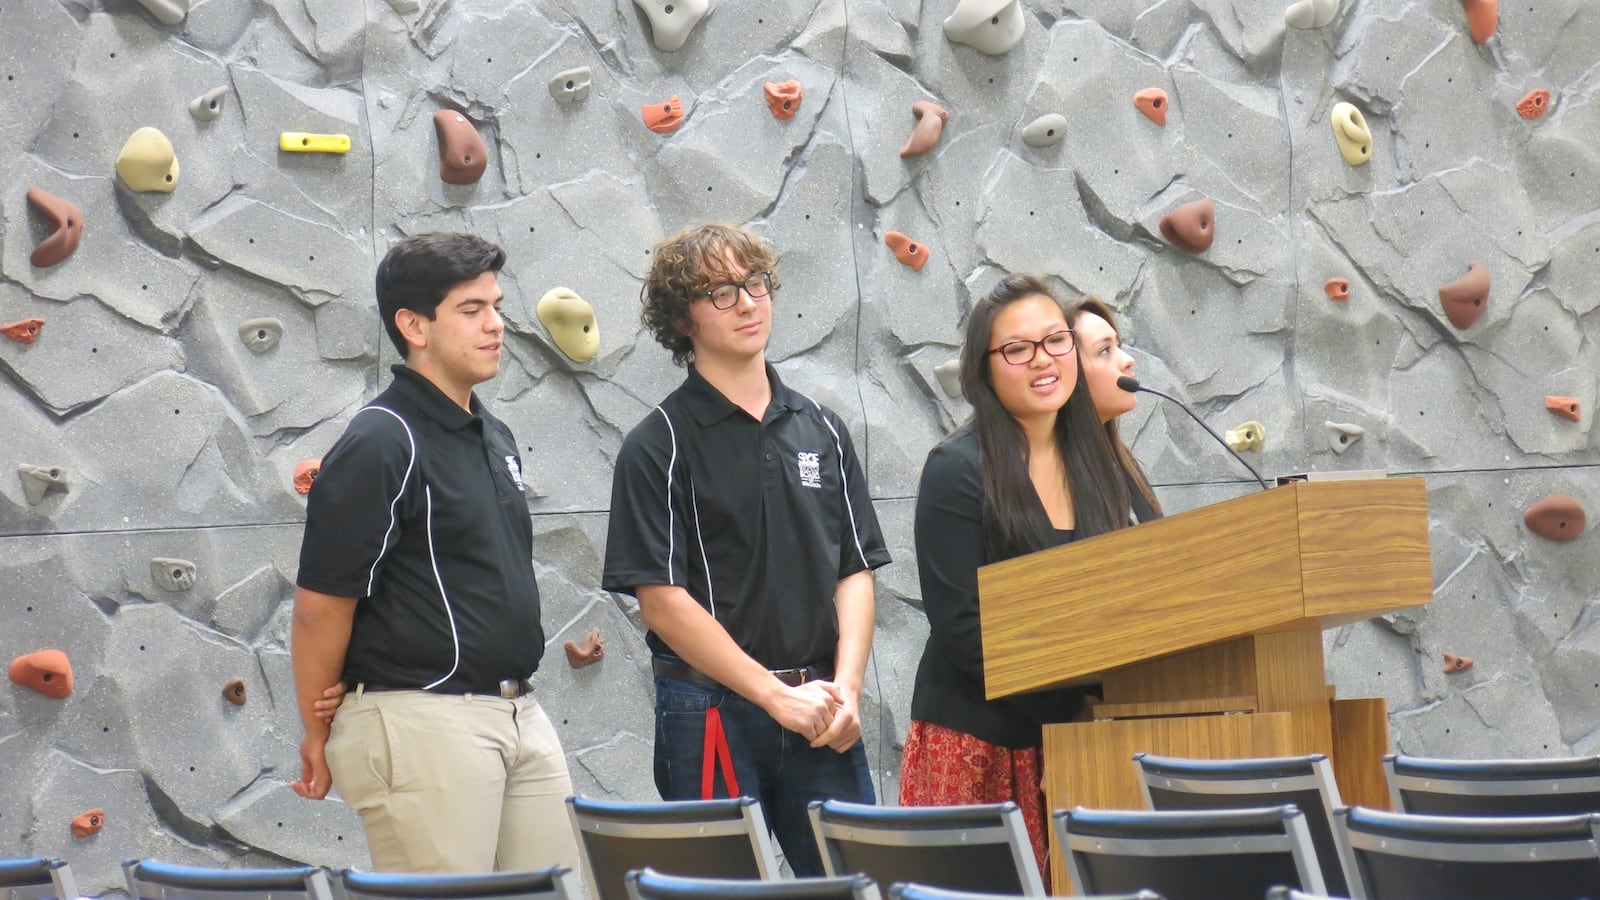 DPS's student board of education describes a visit to CASB and schools' participation in the Aspen Challenge at a meeting of the district's board on Jan. 15.